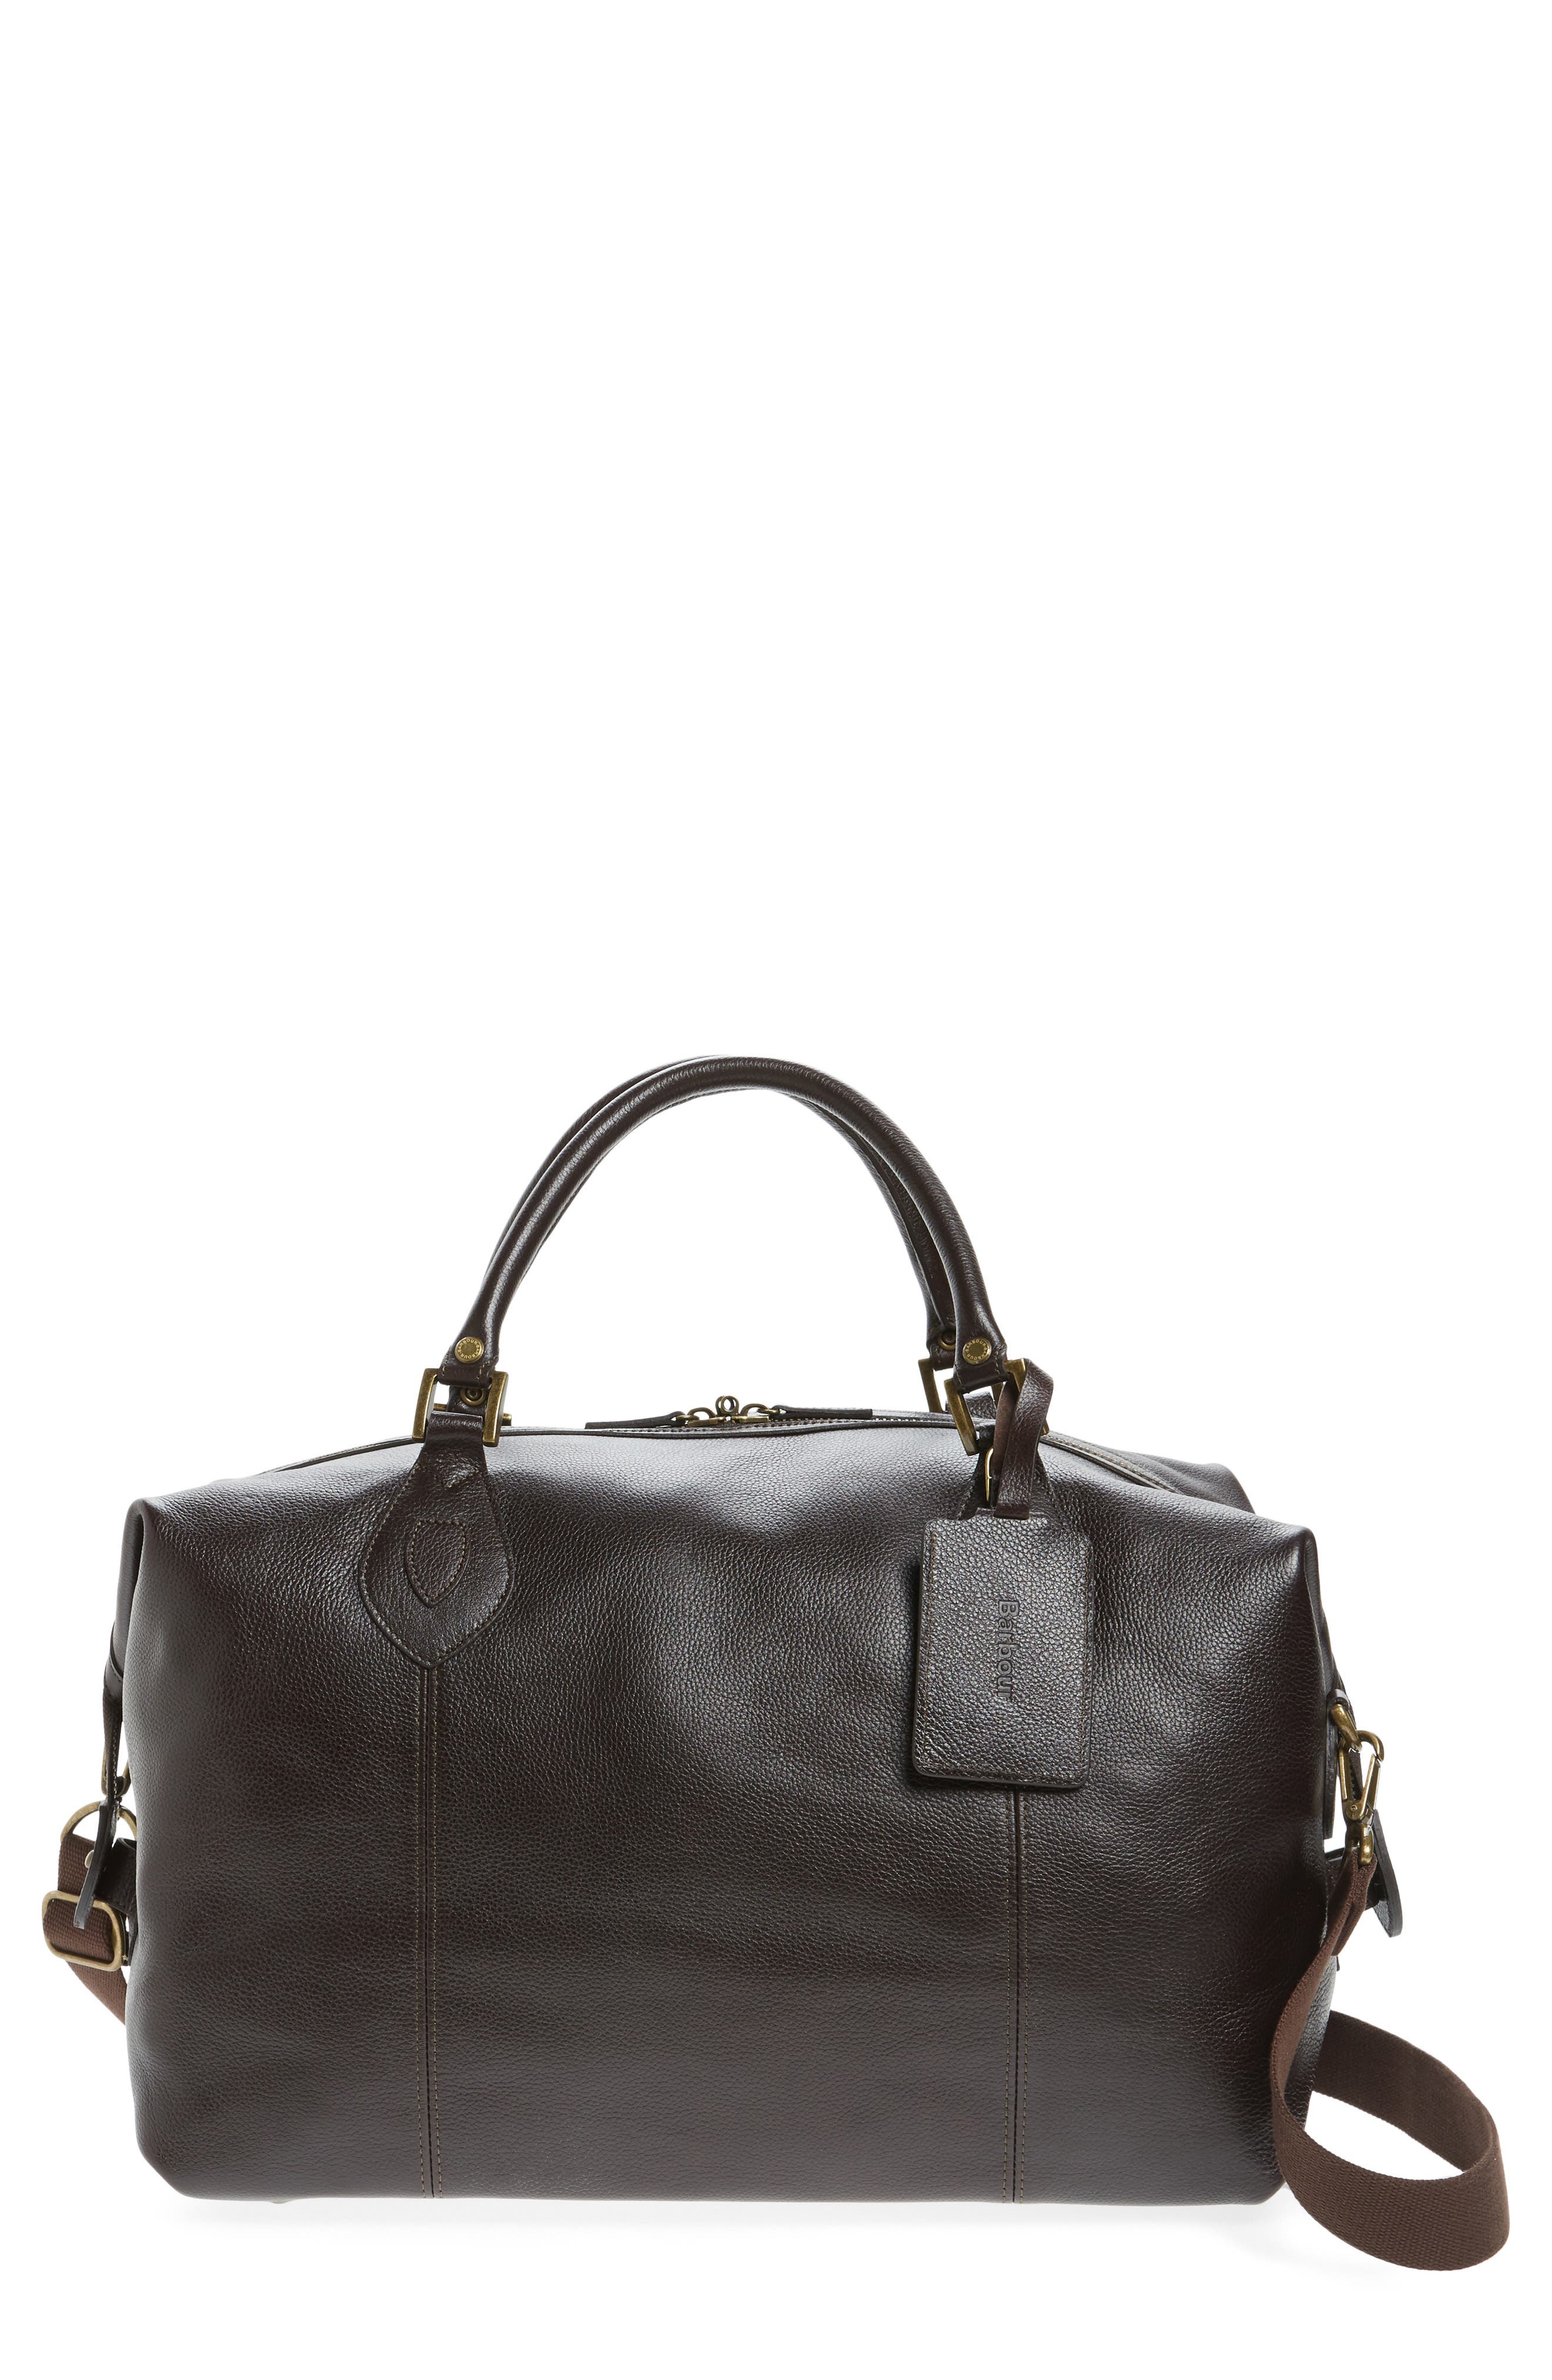 barbour leather travel bag